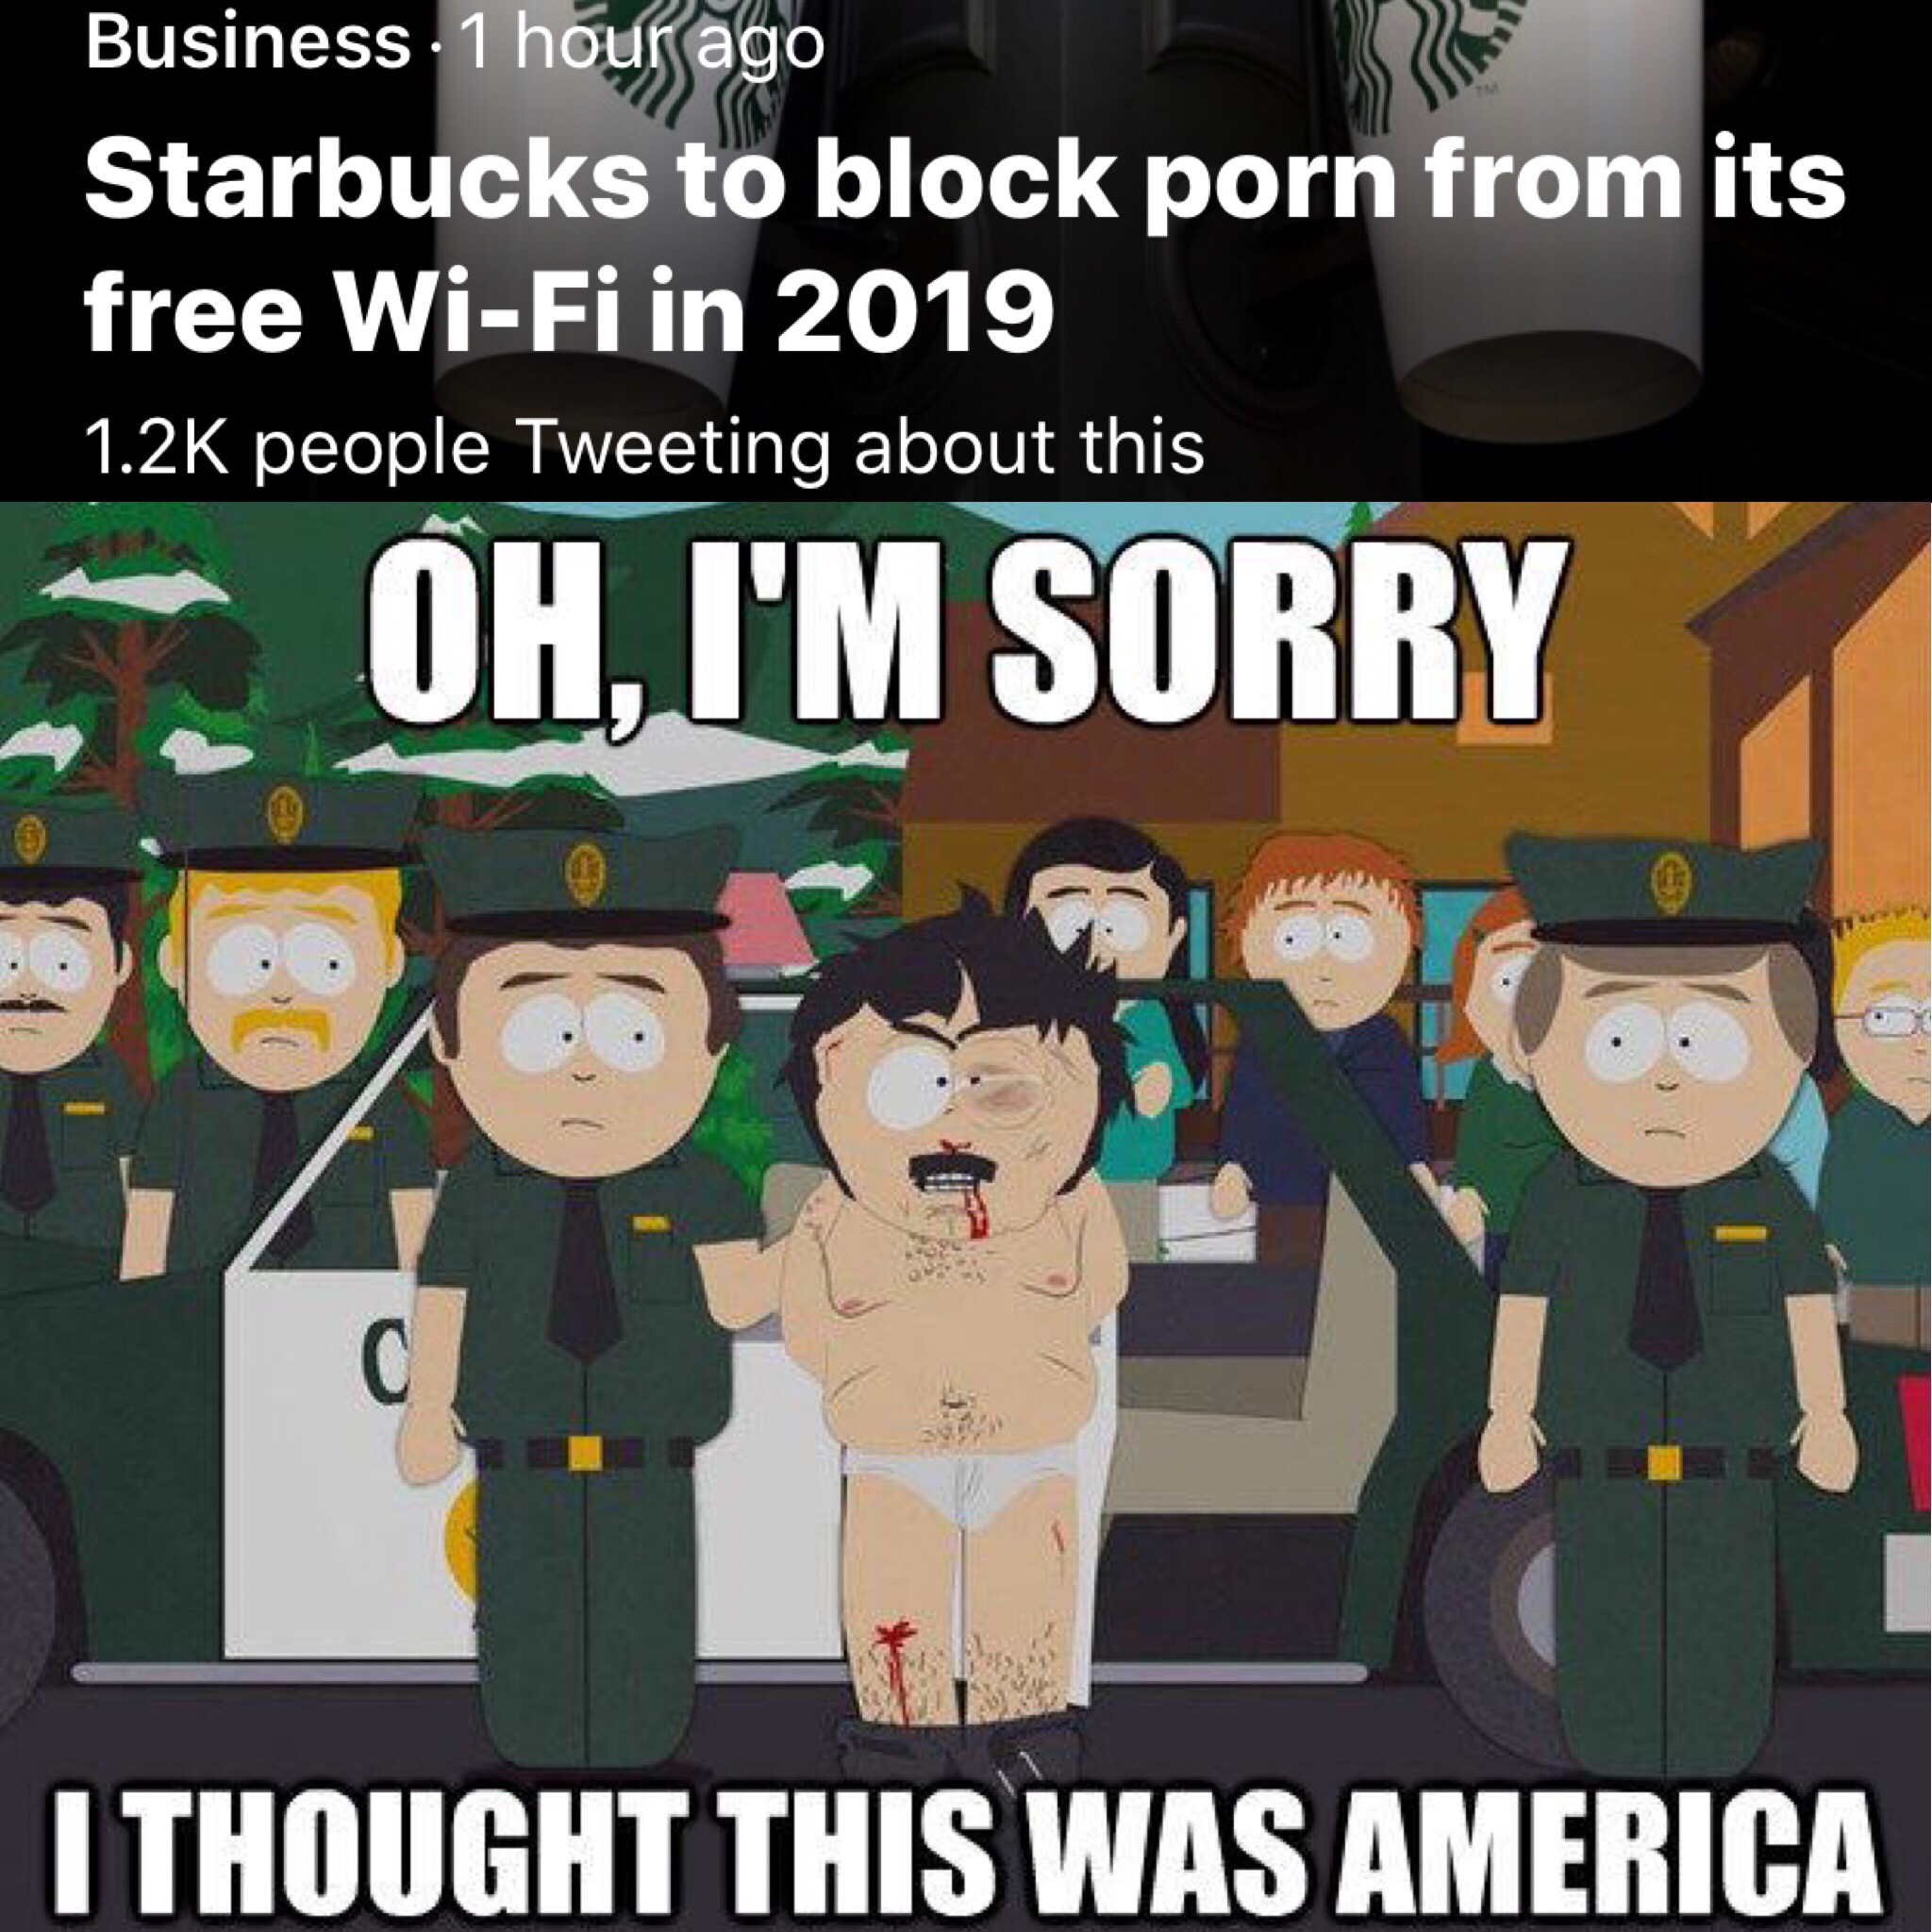 im sorry i thought this was america - Business 1 hour ago Starbucks to block porn from its free WiFi in 2019 people Tweeting about this Oh, I'M Sorry I Thought This Was America